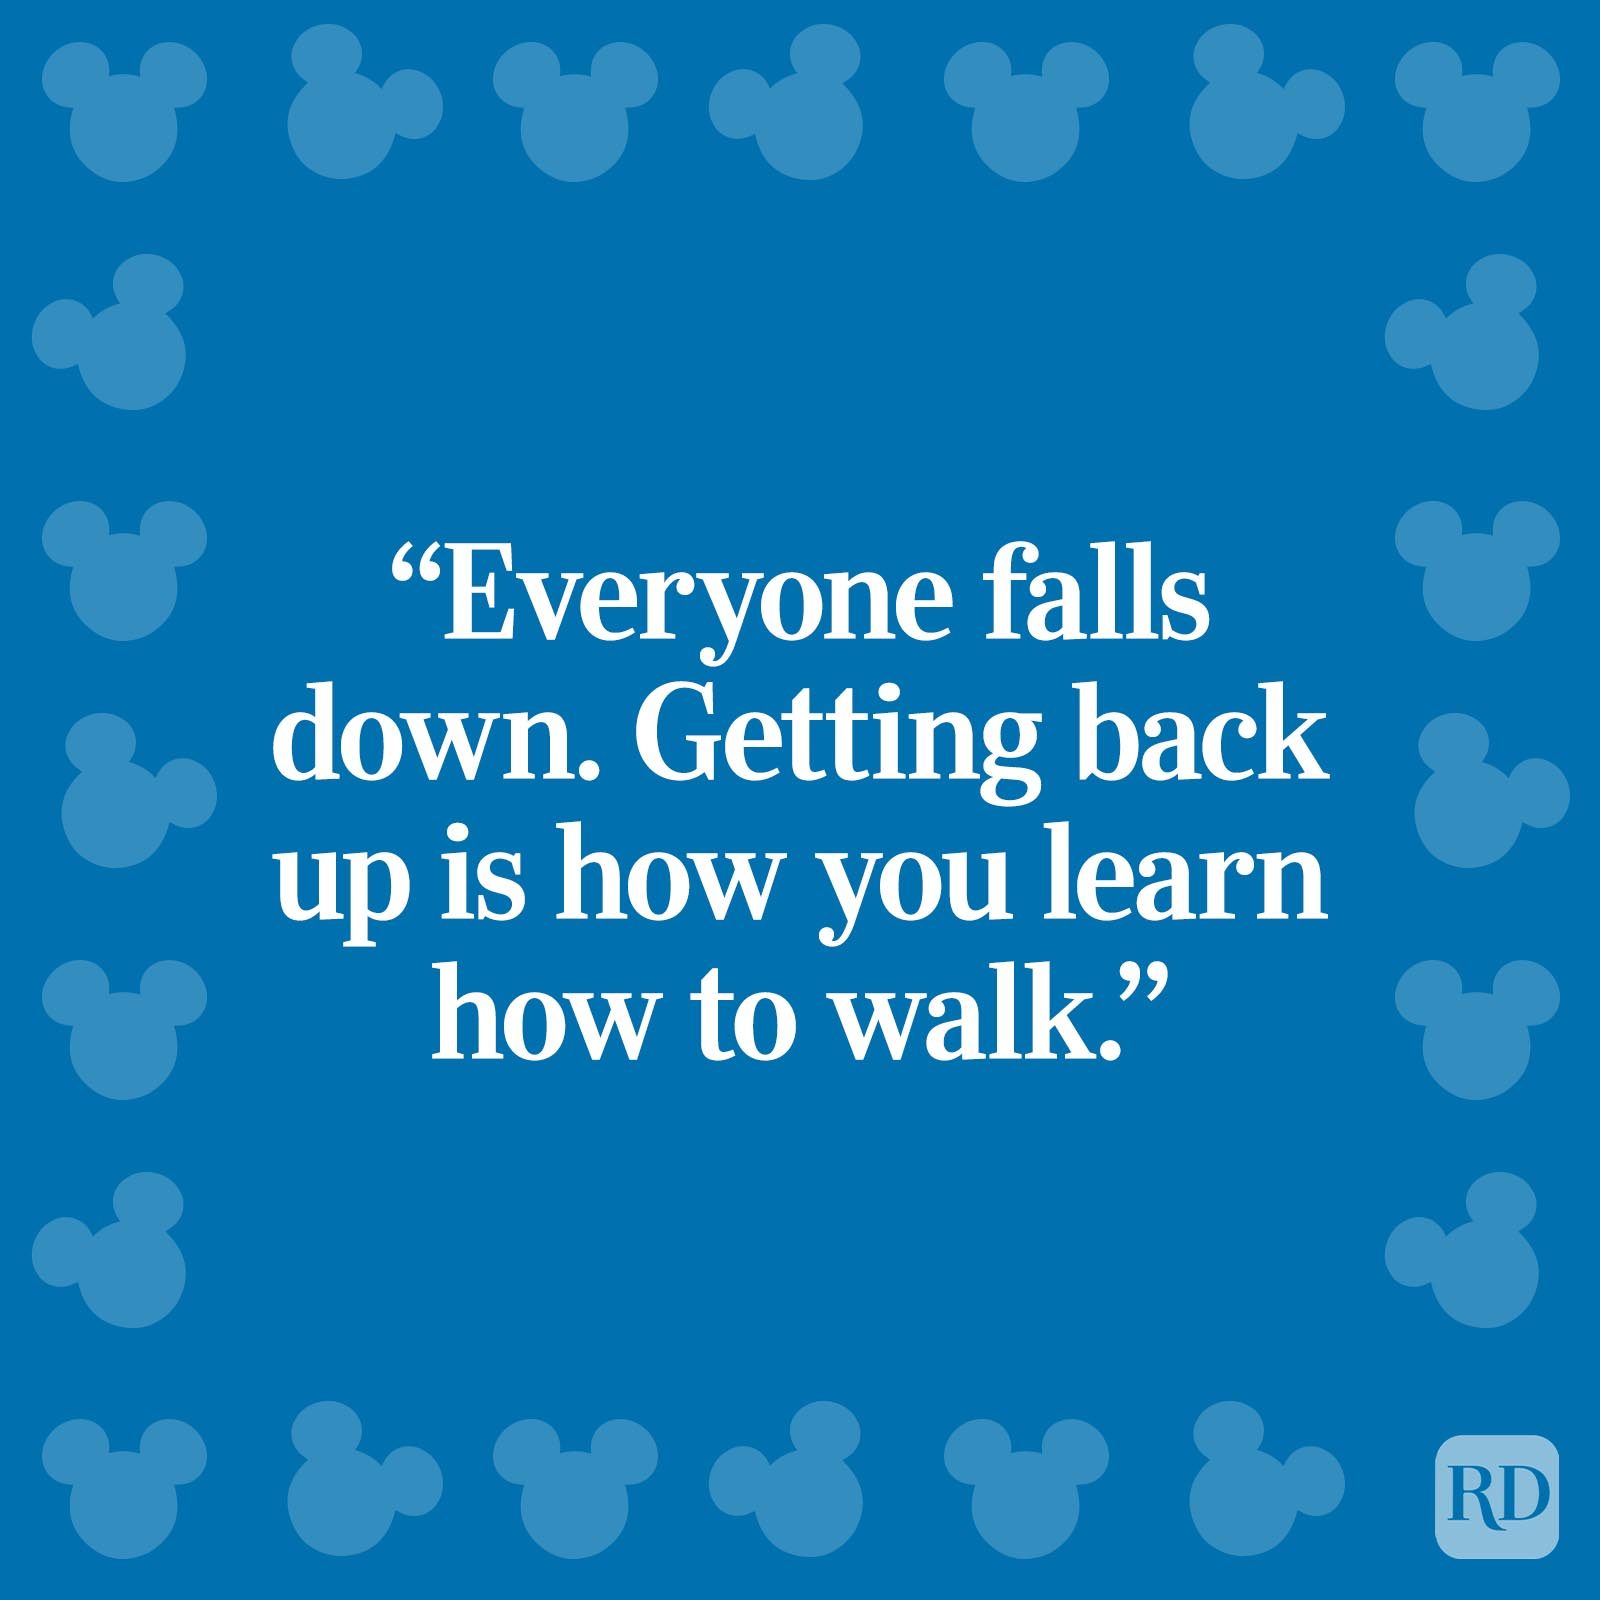 "Everyone falls down. Getting back up is how you learn how to walk."